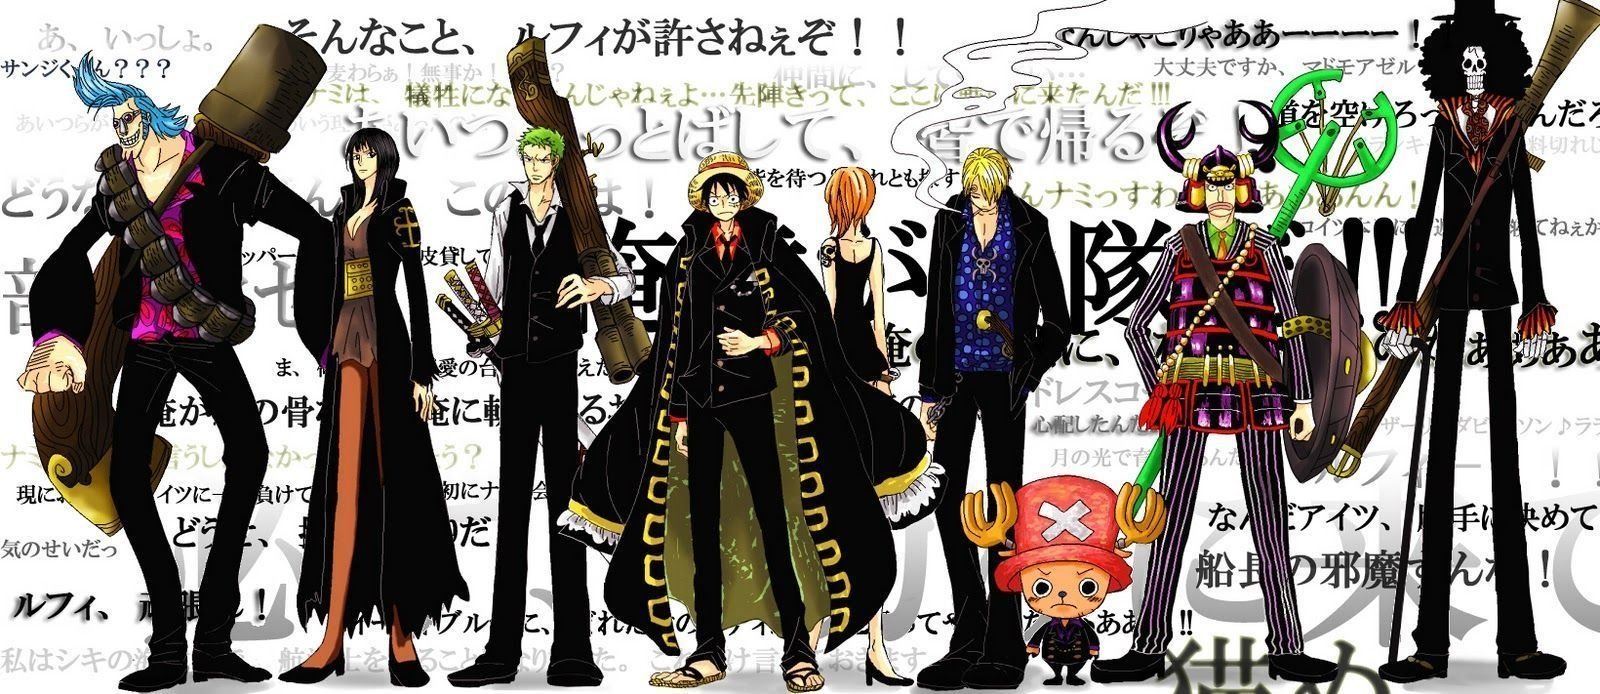 The Straw Hat Pirates Image Id Image Abyss